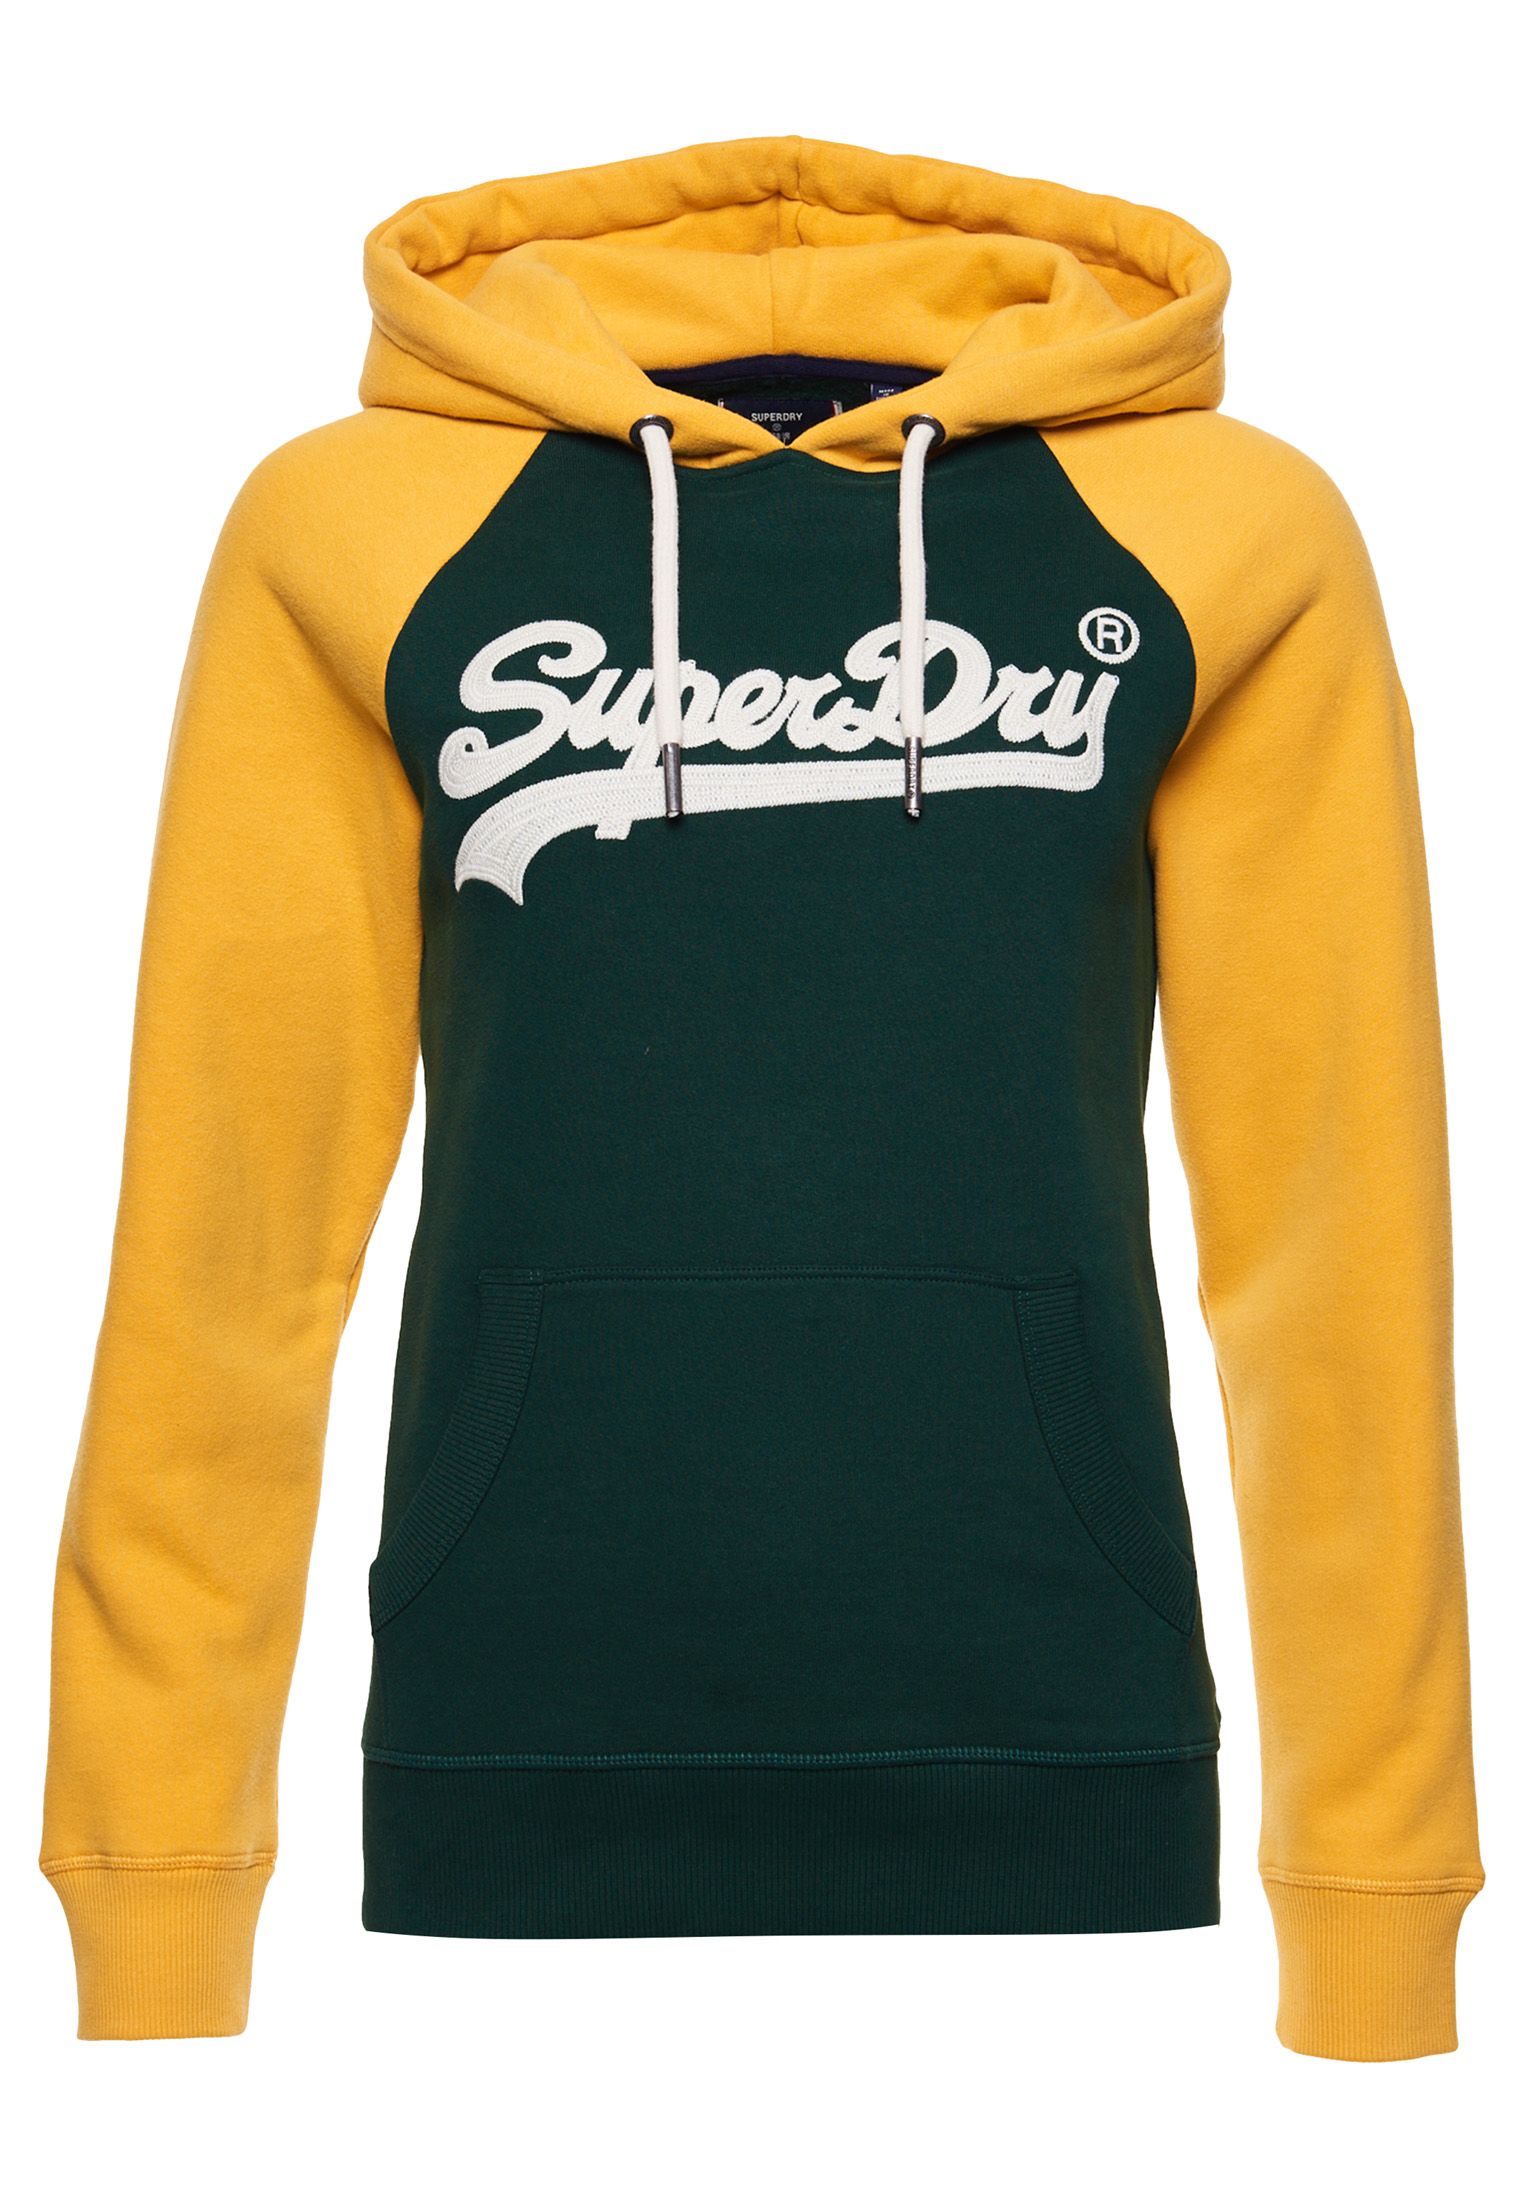 Hoodies are always a must-have for any wardrobe, so update yours with the Vintage Logo American Classic raglan hoodie. Featuring a colour block design, raglan sleeves and a textured vintage logo design.Relaxed fit – the classic Superdry fit. Not too slim, not too loose, just right. Go for your normal sizeLong sleevesDrawstring hoodRibbed cuffs and hemRaglan sleevesColour block designSignature logo patchFlock vintage logo